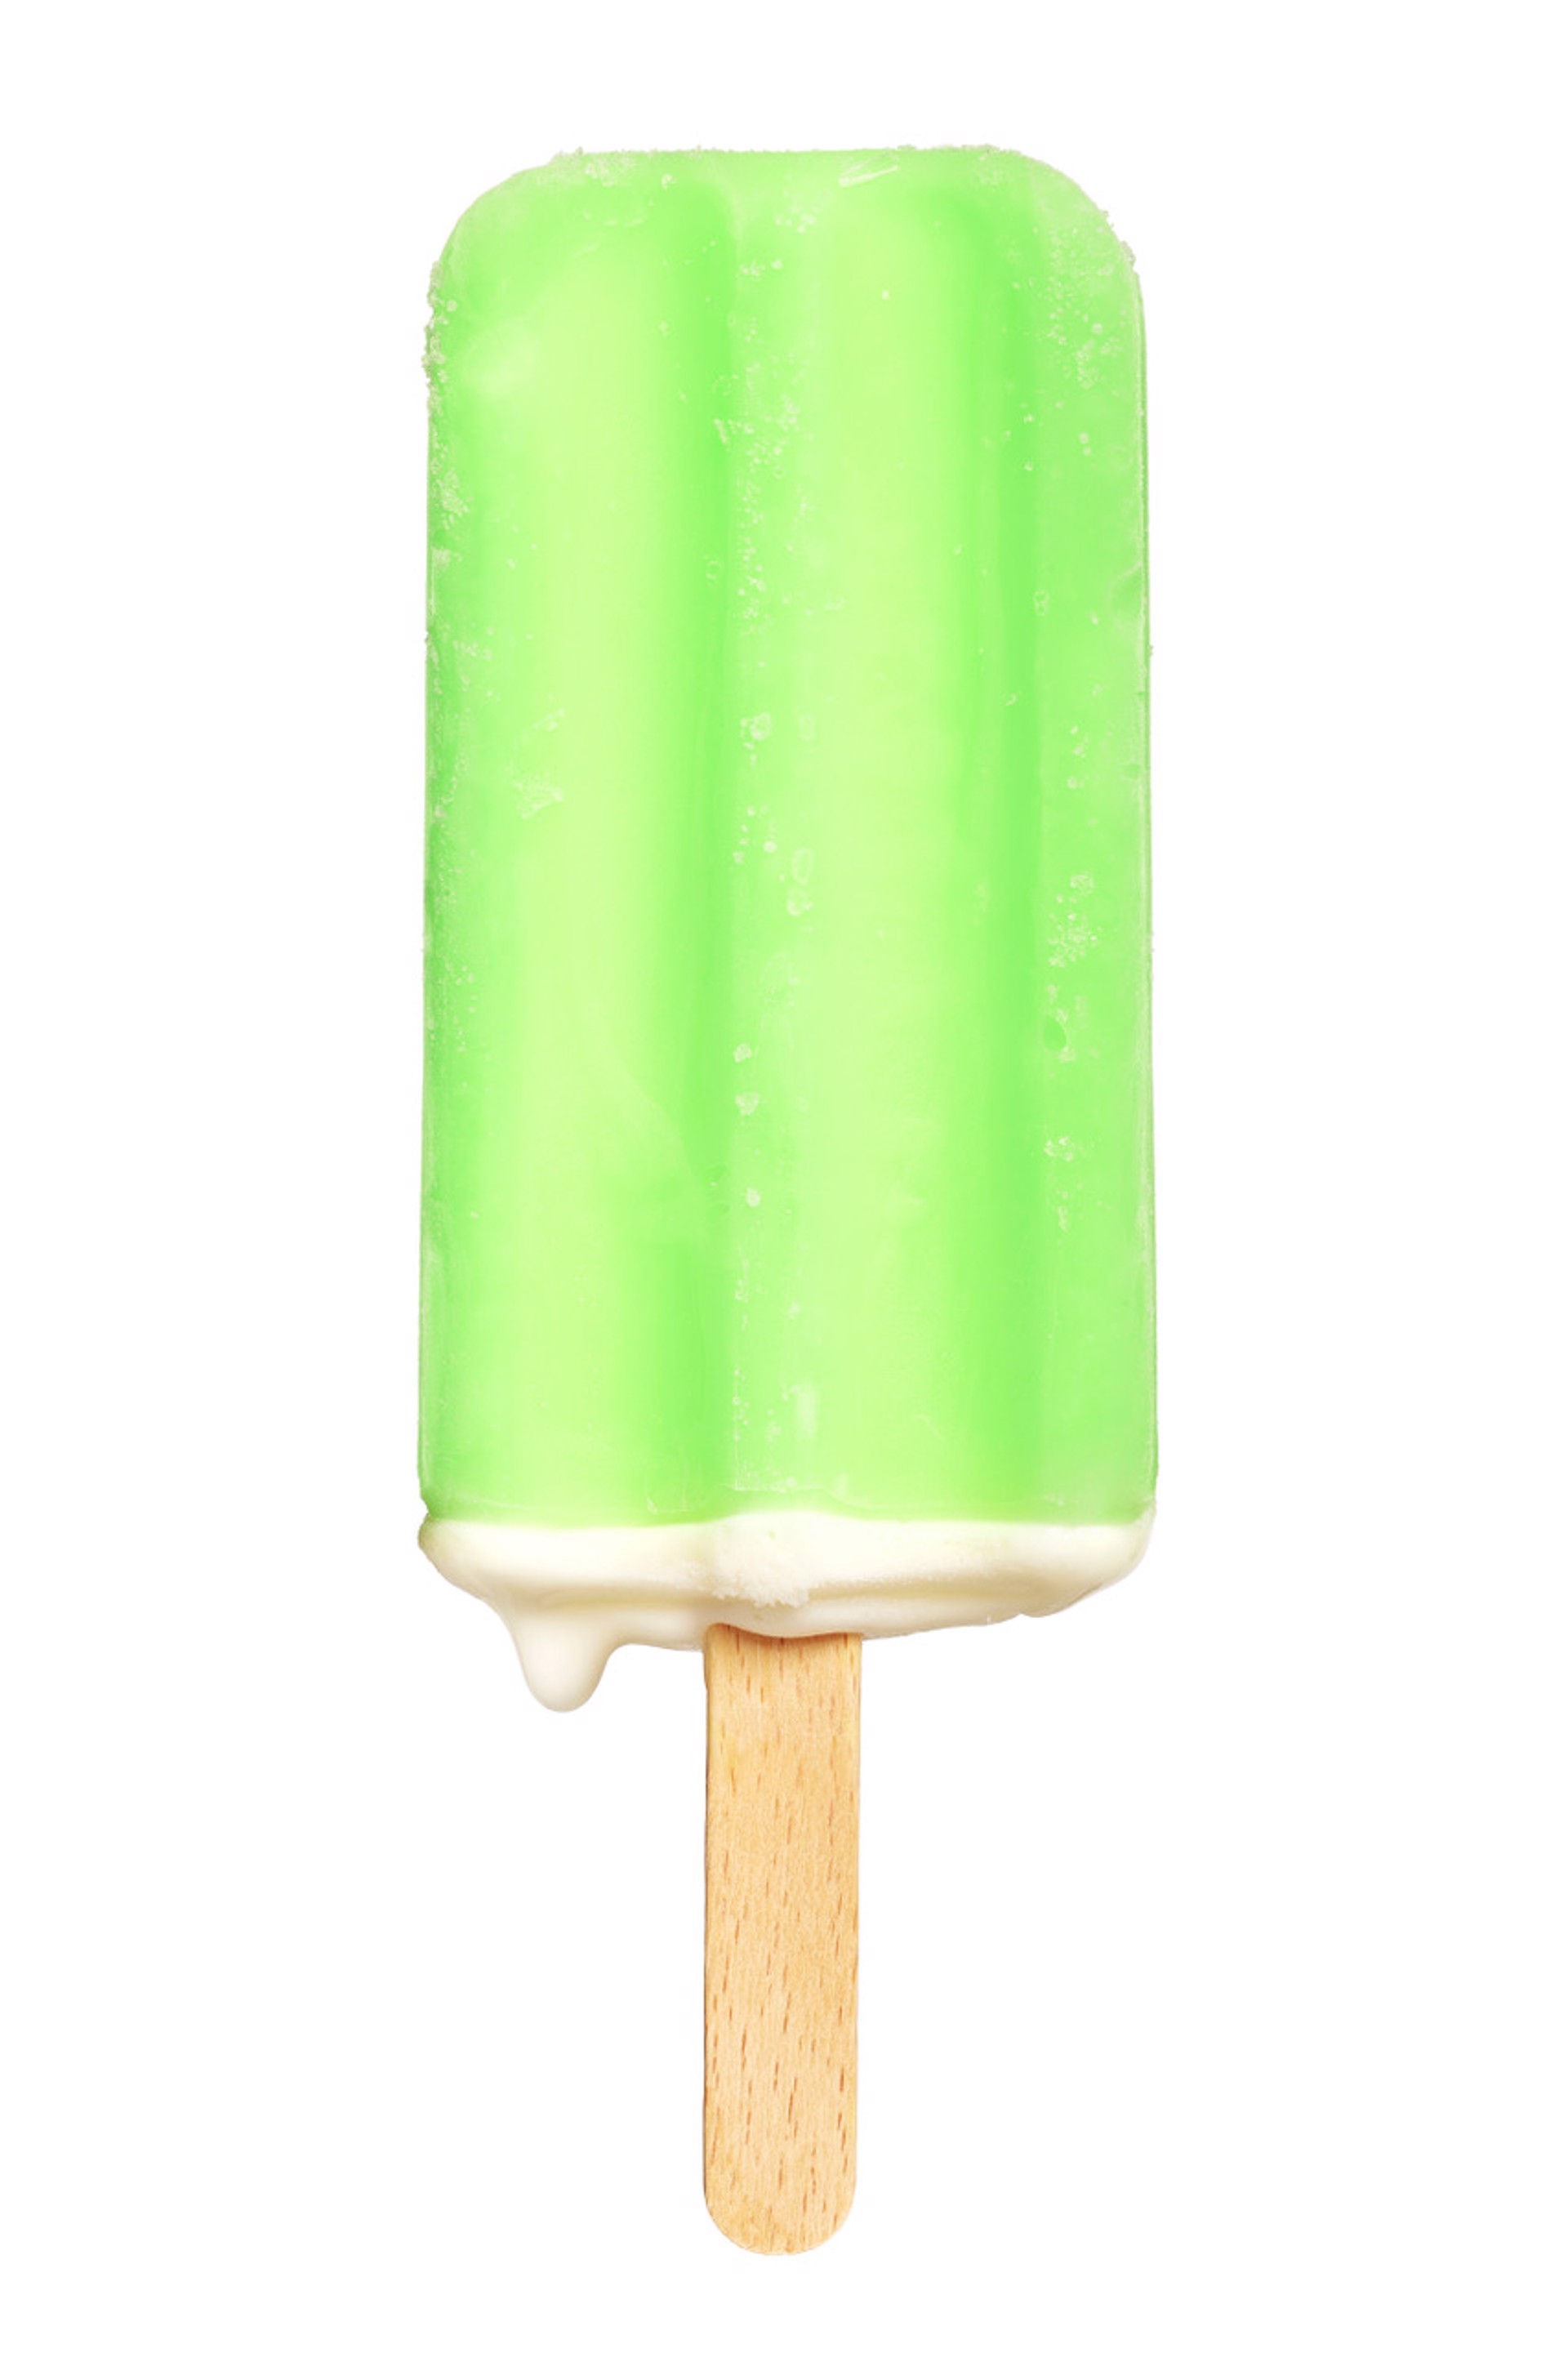 Green Creamsicle by Peter Andrew Lusztyk / Refined Sugar